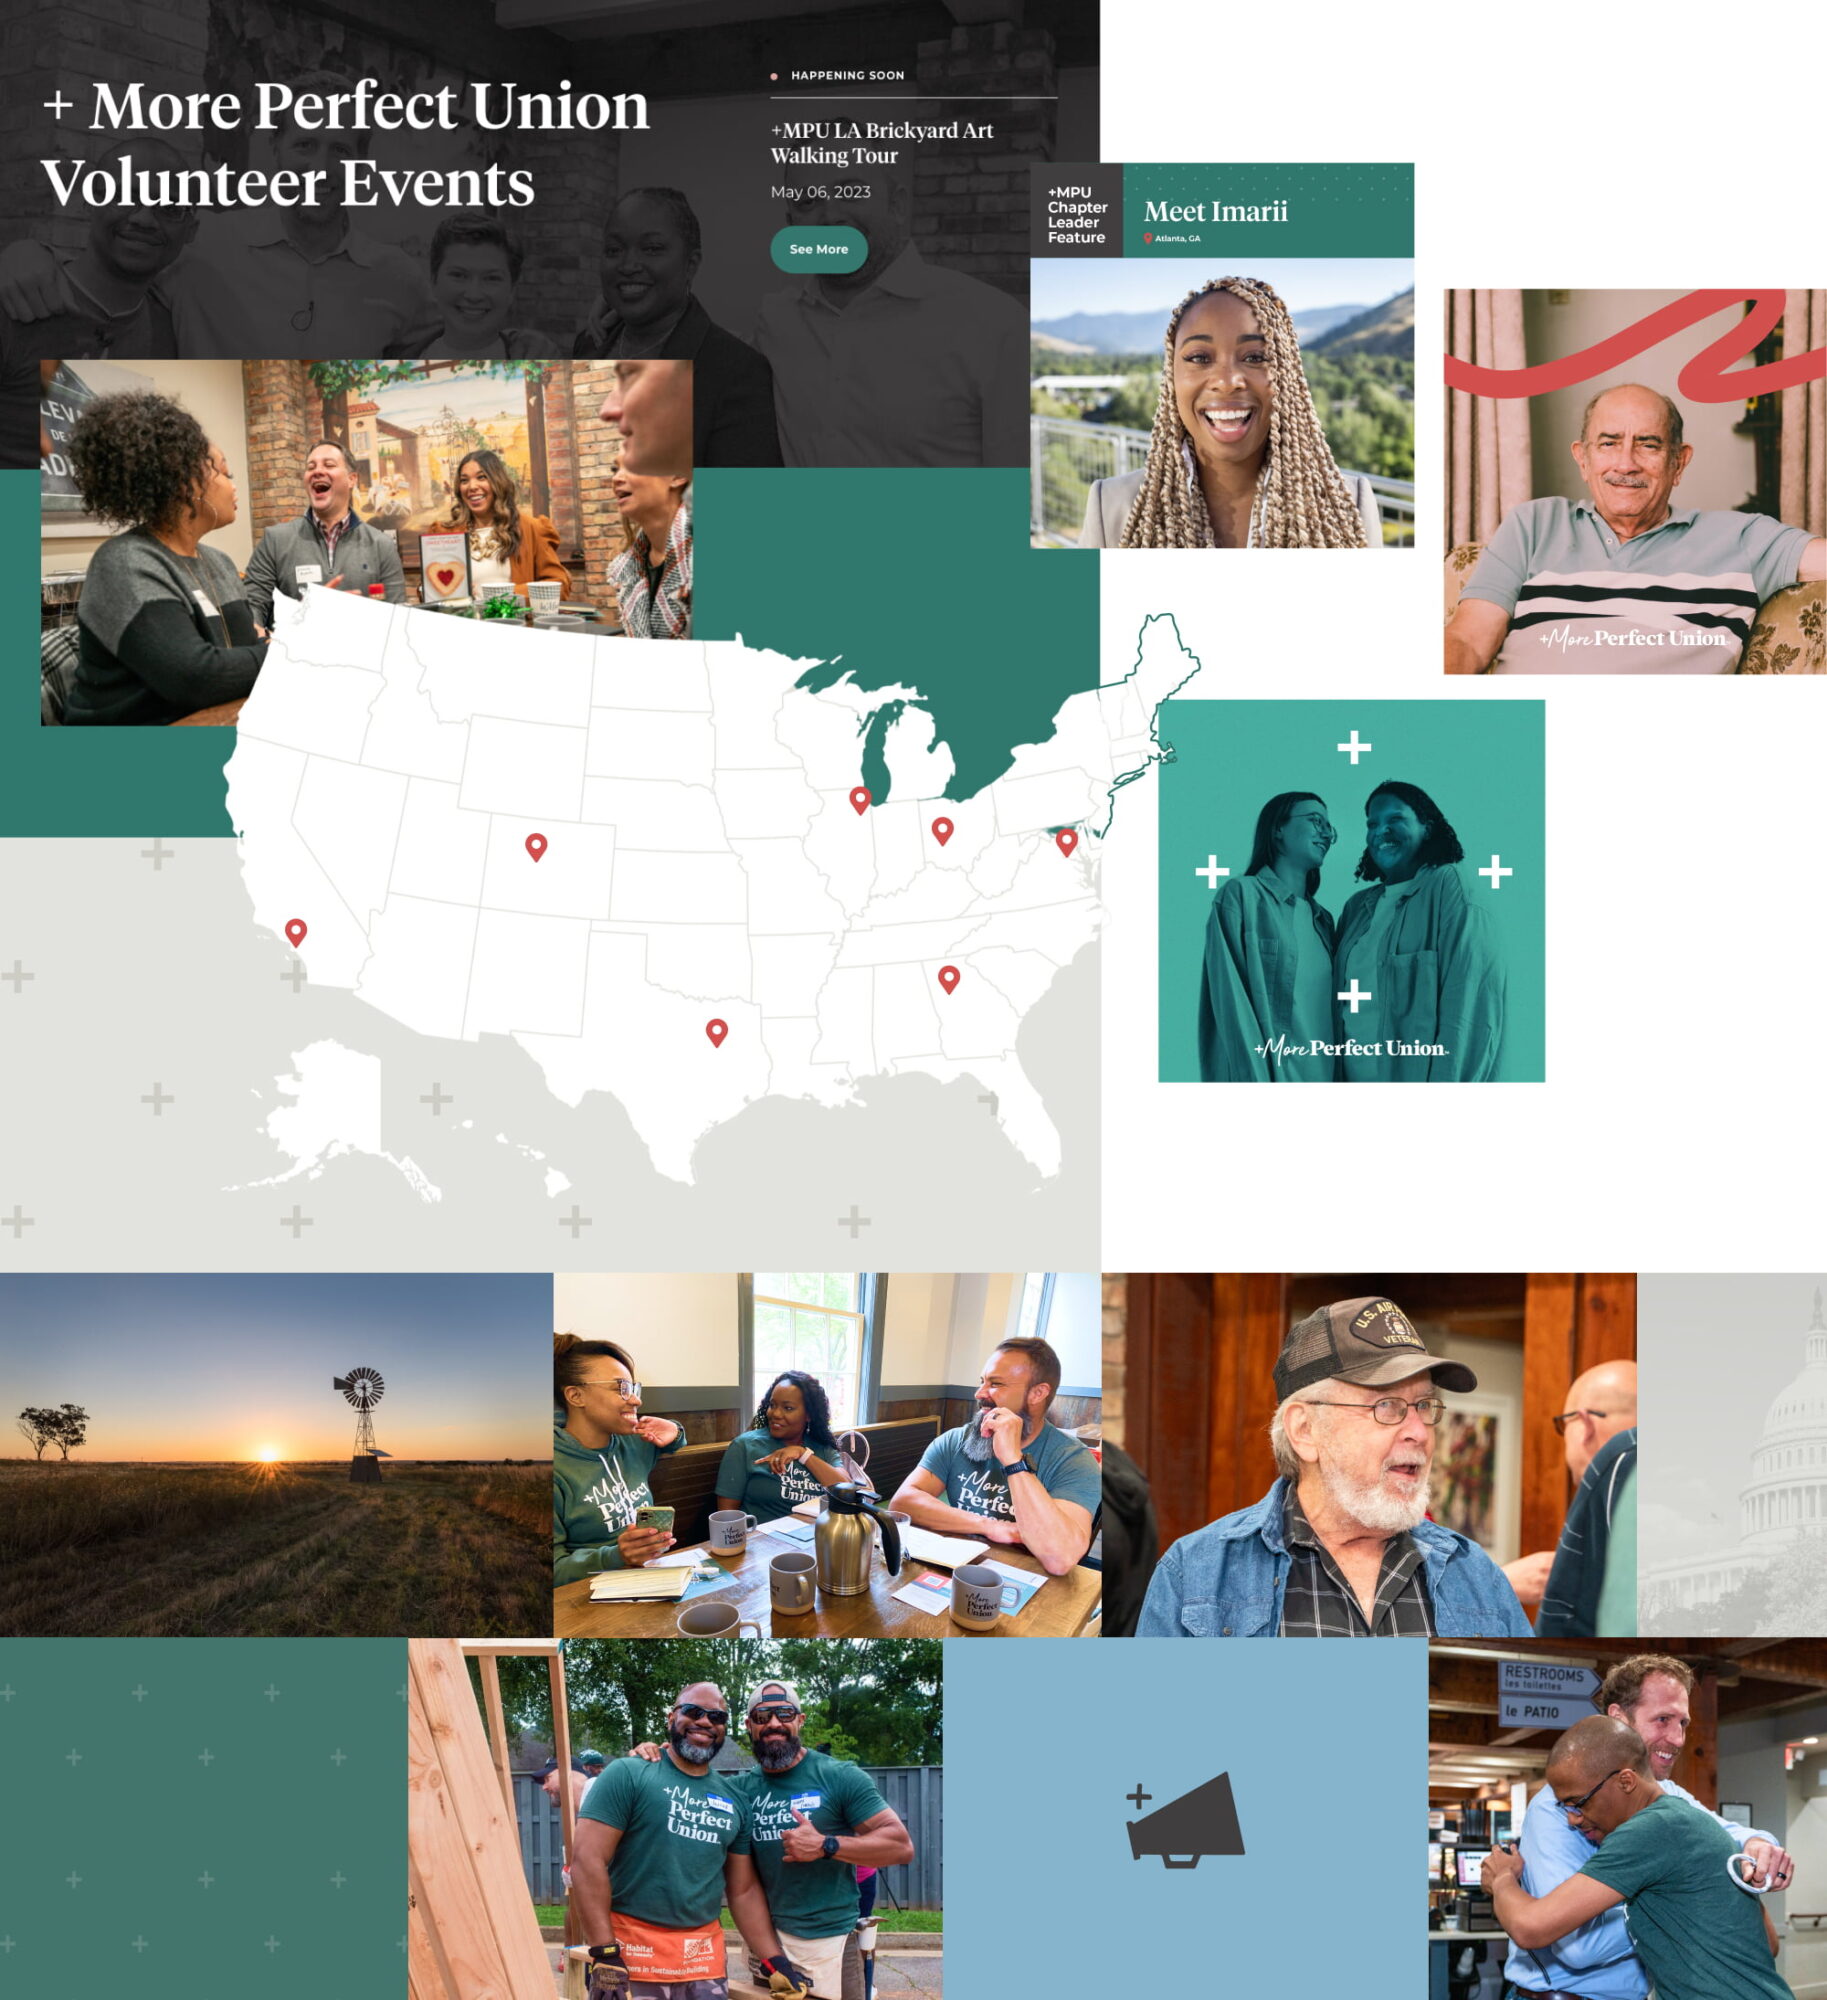 A large collage of design work for +MPU is featured. Within the collage is a screenshot of +MPU's event webpage which has a group image of +MPU employees smiling with a dark gray overlay including a headline saying, “+More Perfect Union Volunteer Events.” Another image of excited and talking event attendees sits below the headline. Off to the side is a small title reading “happening soon” where the words “+MPU LA Brickyard Art Walking Tour” are listed with a date and a green button to see more about the featured event. A map of the United States with coral location pins slightly overlaps the webpage screenshot; the bottom of the map overlaps on a small, light gray pattern of plus signs. Off to the side of the webpage and map is three Instagram social posts, one features a smiling portrait of Imari Poindexter with the descriptions “+MPU Chapter Leader Feature” and “Meet Imari” alongside her location of “Atlanta, Georgia” which are written on a dark gray and green bar. The other Instagram post is a calm and smiling old man with a striped shirt; a coral squiggly line runs above his head and the +More Perfect Union logo sits at the bottom of the page. The final Instagram square features two smiling women in black and white against a dark teal overlay, perhaps a Queer couple or friends. Four plus signs frame the women and the +More Perfect Union logo sits near the bottom of the square. A tiled collage of +MPU brand elements features an American farm and wheat field with a windmill; a group of two Black women and one white man with a long beard wearing +MPU t-shirts and sitting in a coffee shop; an elderly veteran in flannel and an Air Force cap; the US capitol building with a gray overlay; a pattern of plus signs on green; a Black man and white man wearing +MPU shirts doing service work at a build site; a megaphone icon on a light blue background; and two men, one white and one Black, hugging in a bar.